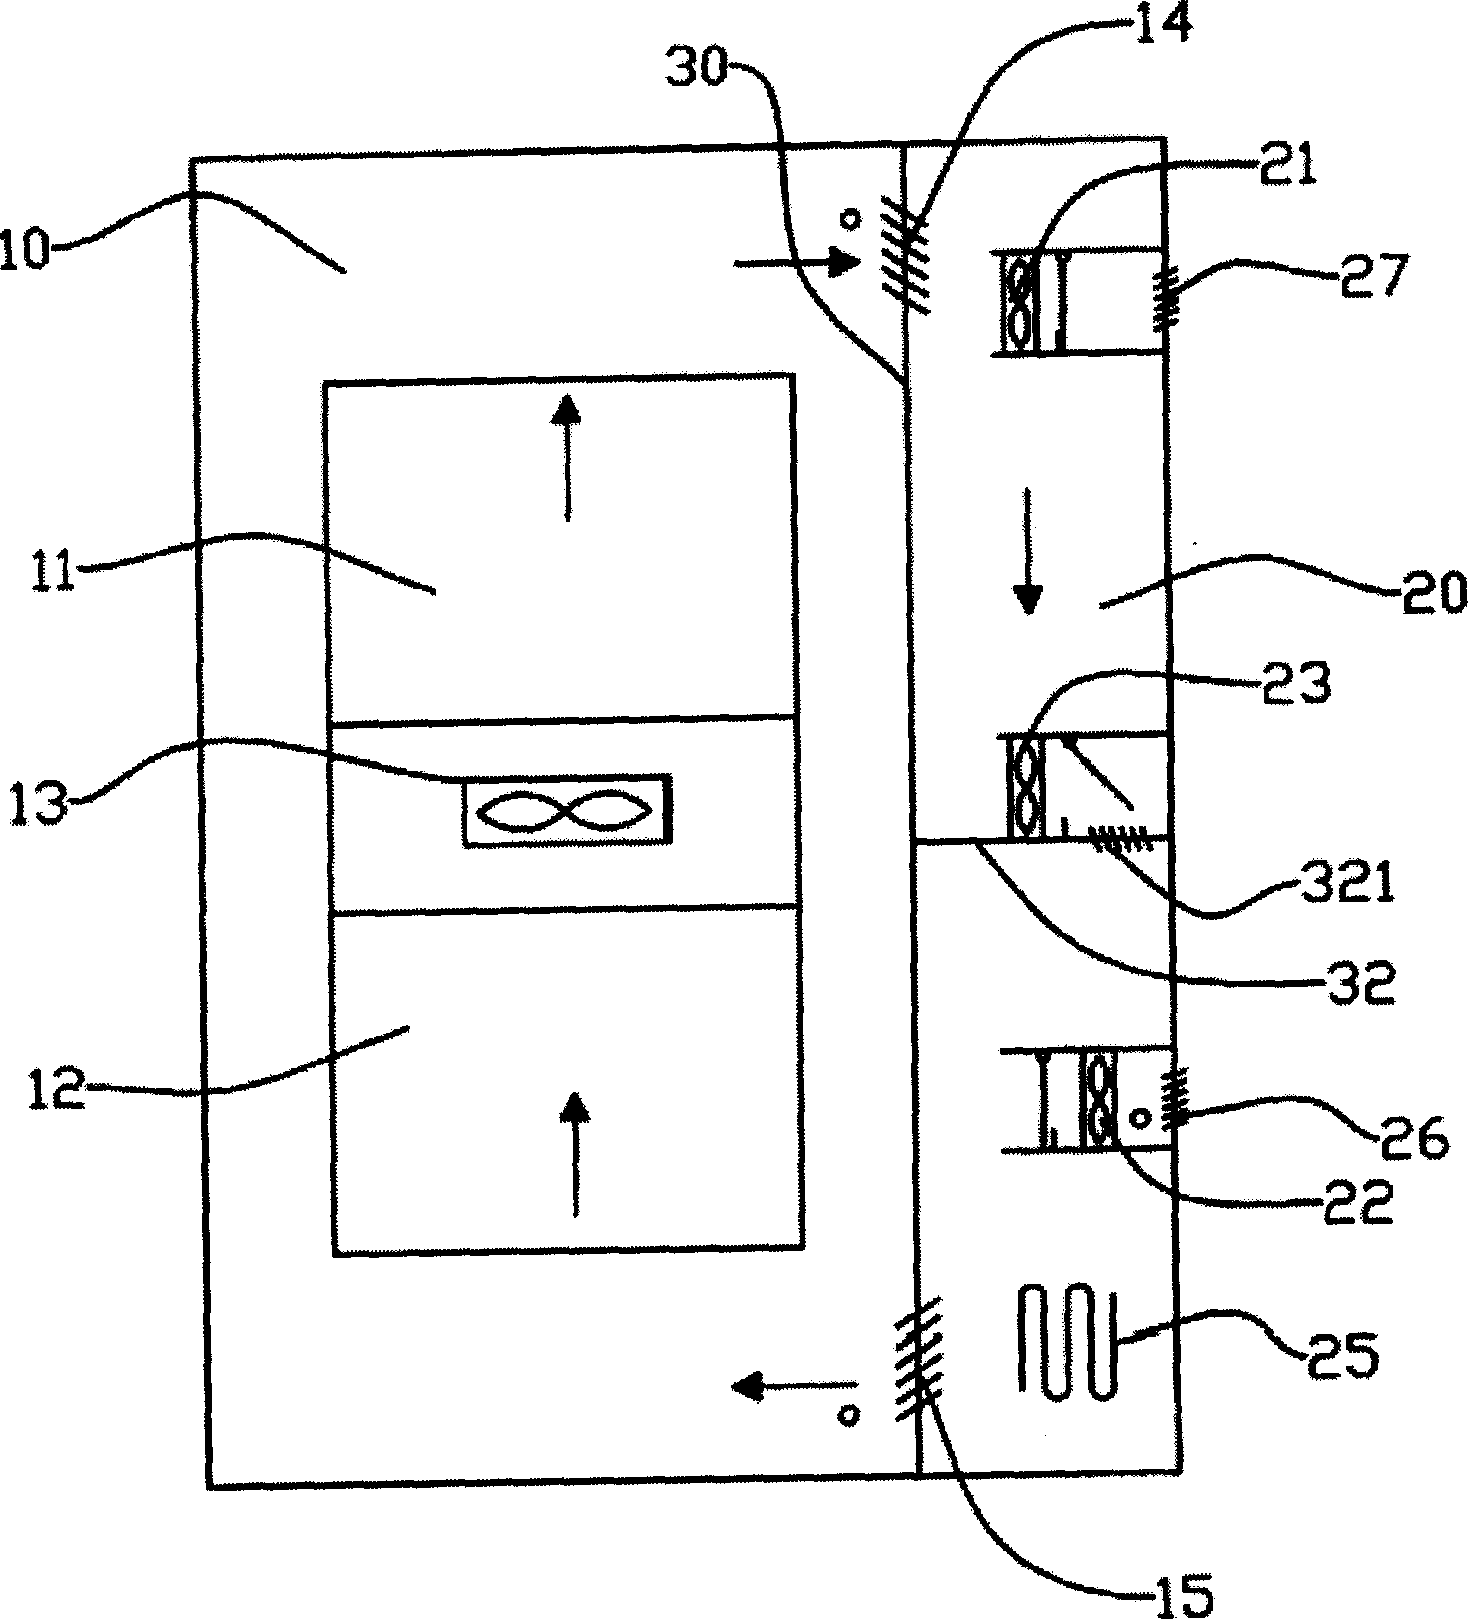 Machine-cabinet temperature controlling system, device and method